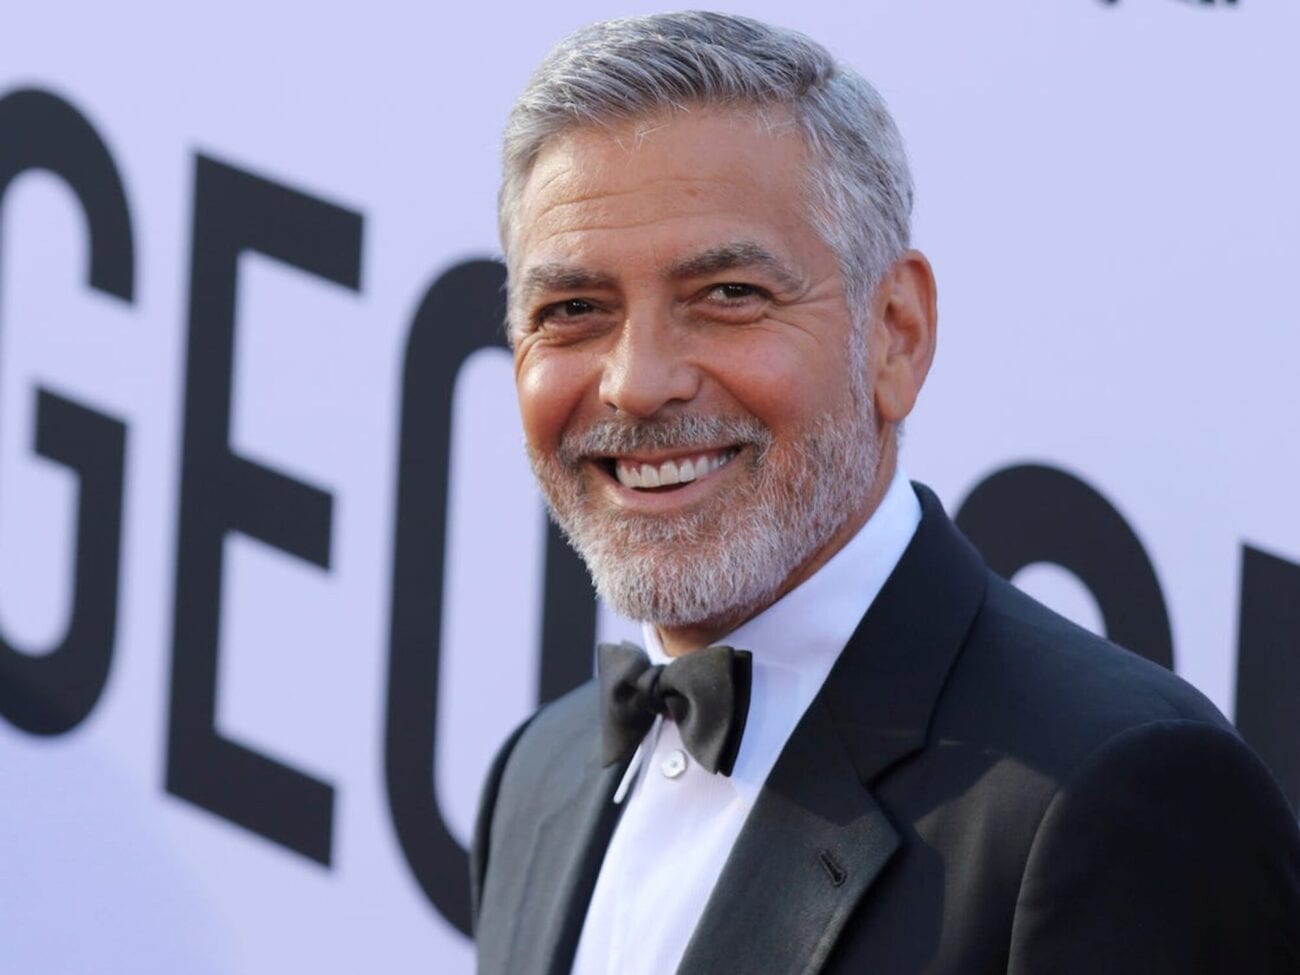 George Clooney's Iconic Haircut: How to Achieve the Look - wide 2